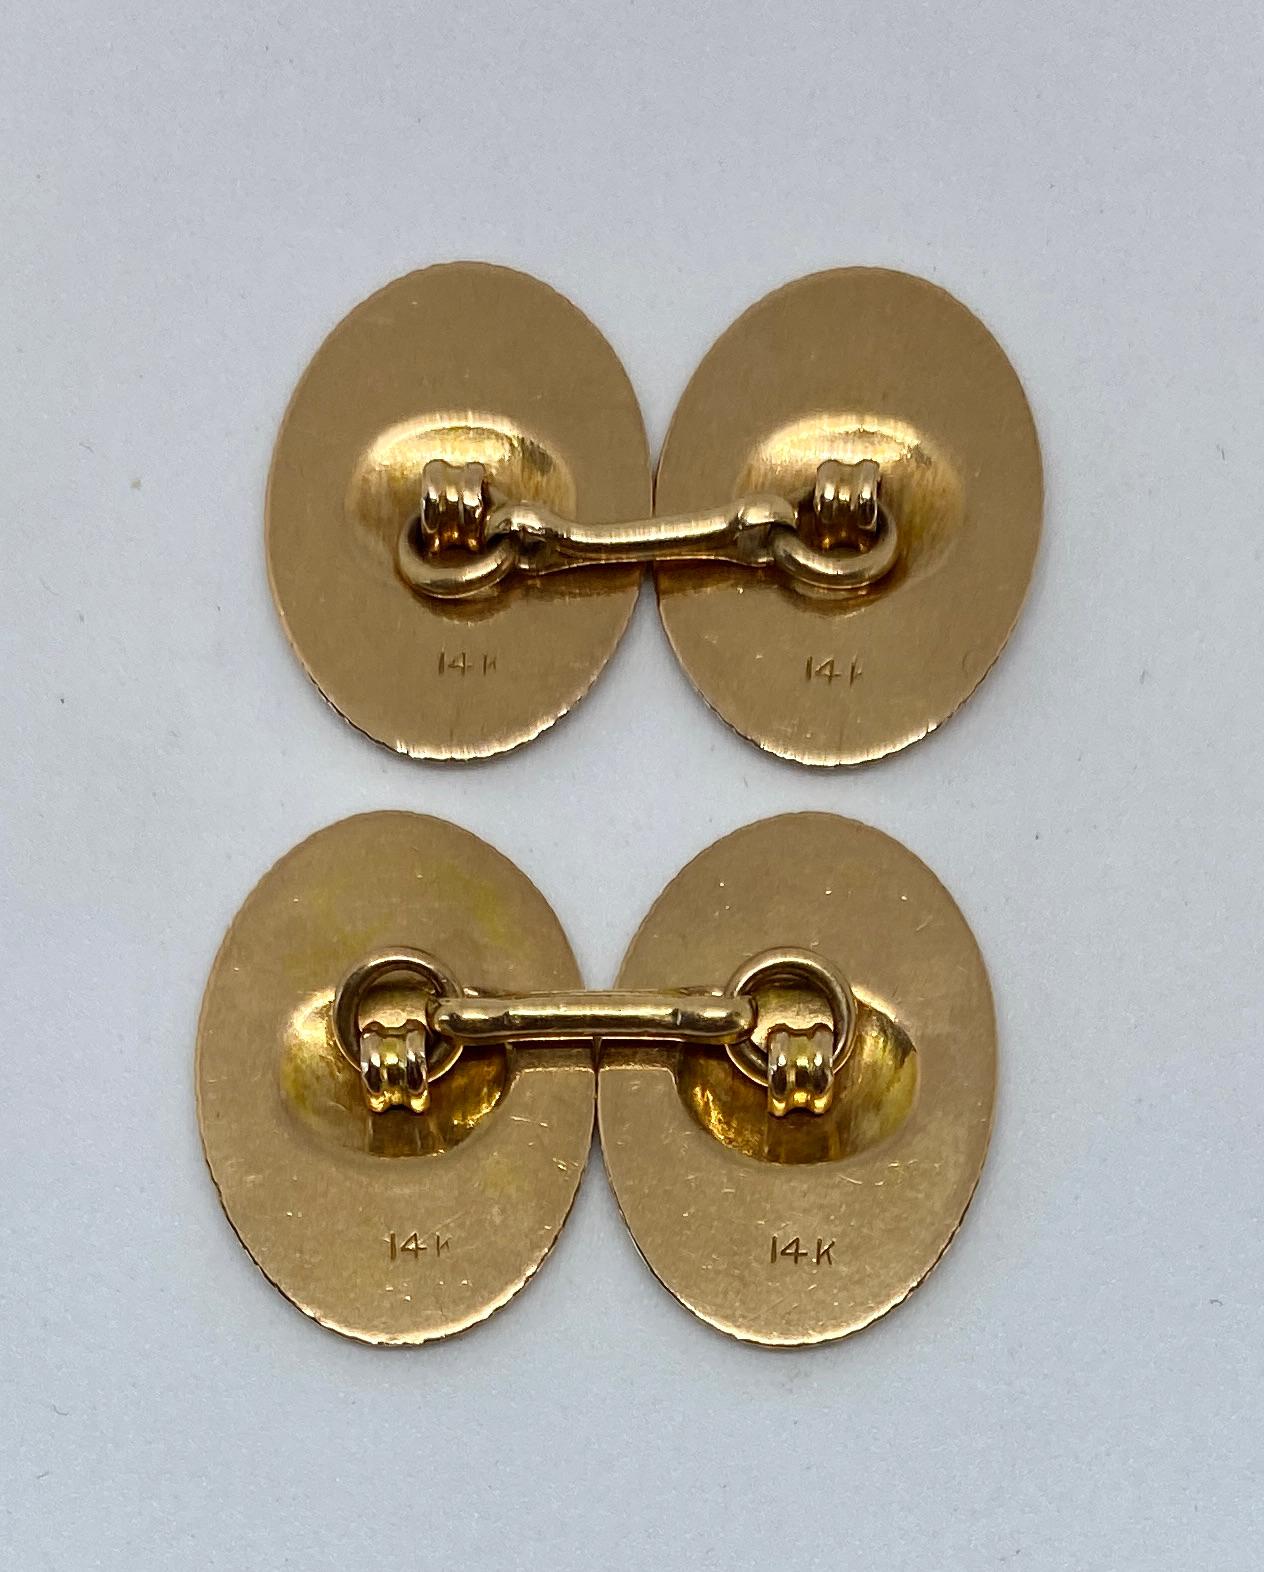 A wonderful pair of oval cufflinks in 14K rose gold featuring intricate milgrain details.

The four cufflink faces each measure 20 mm by 14.4 mm. They're stamped 